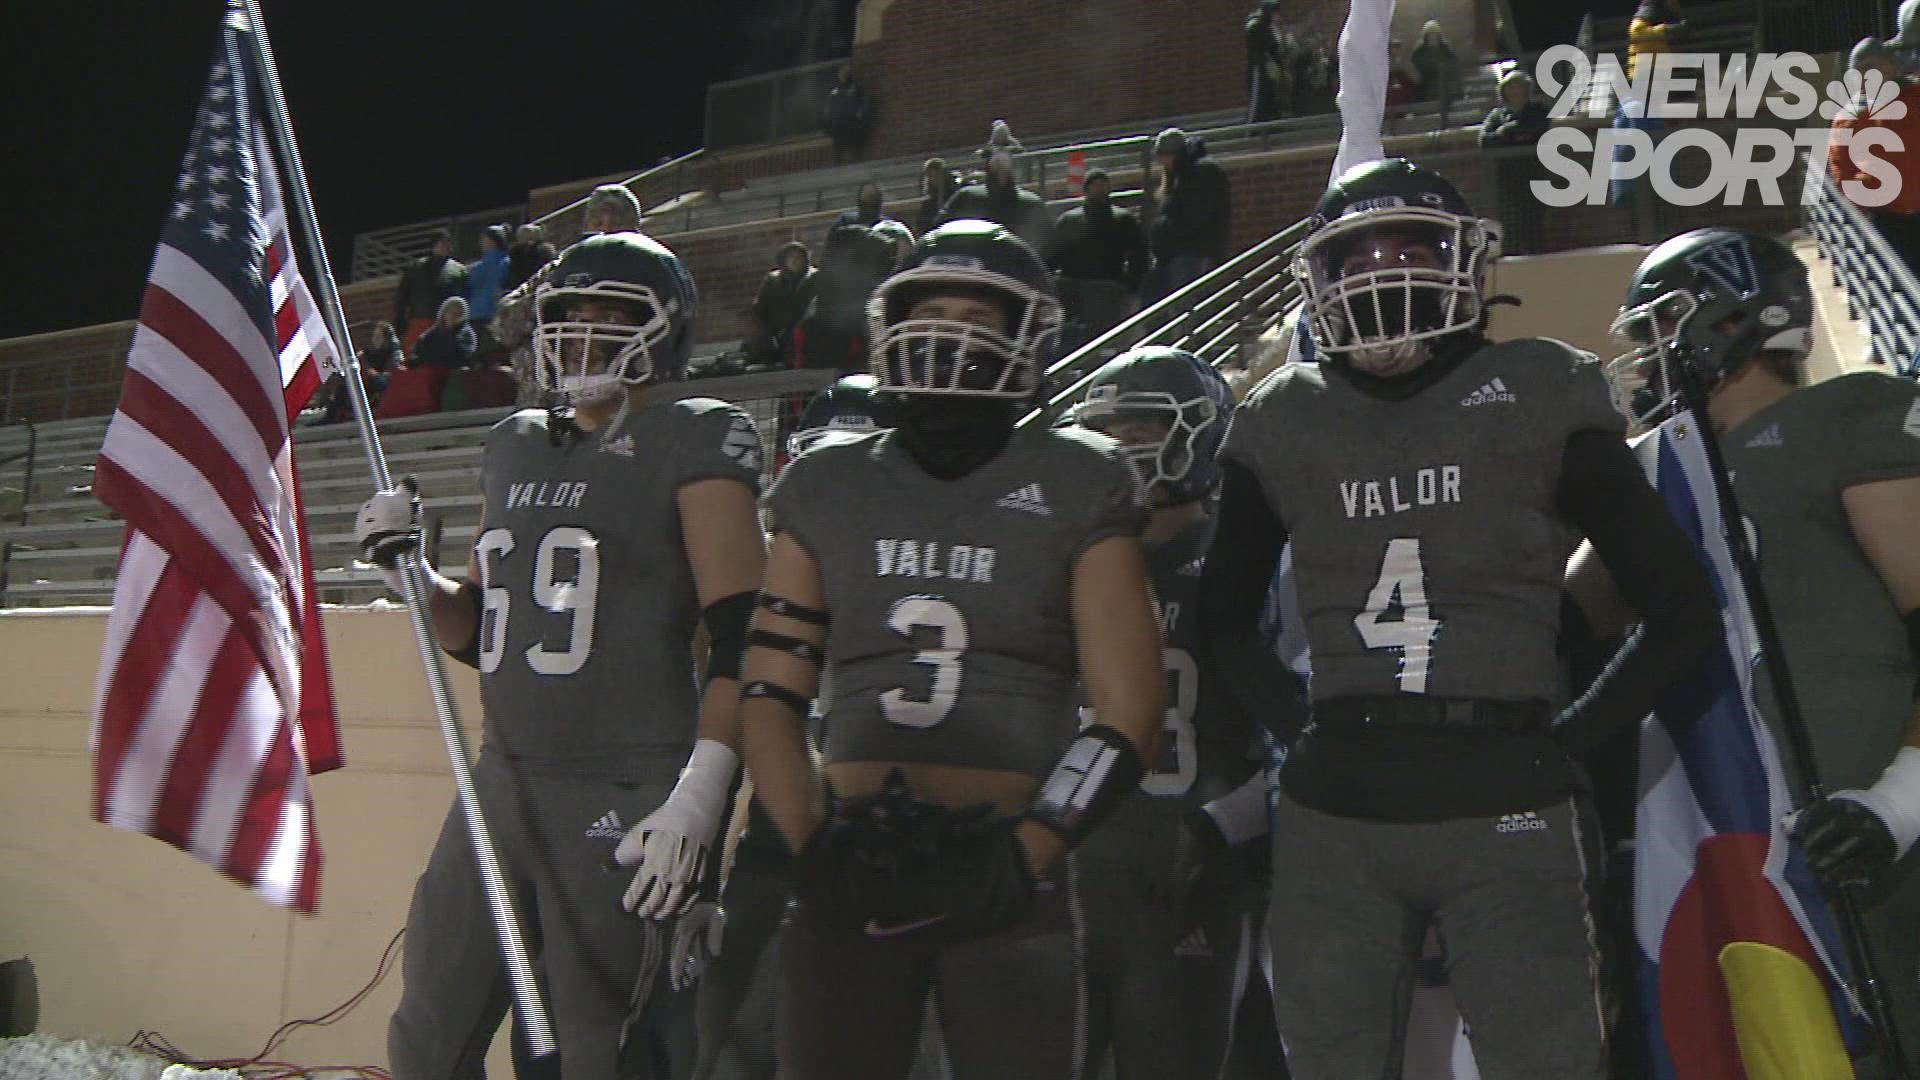 The Eagles defeated the Raiders 45-28 on Friday night to advance to the state semifinals.